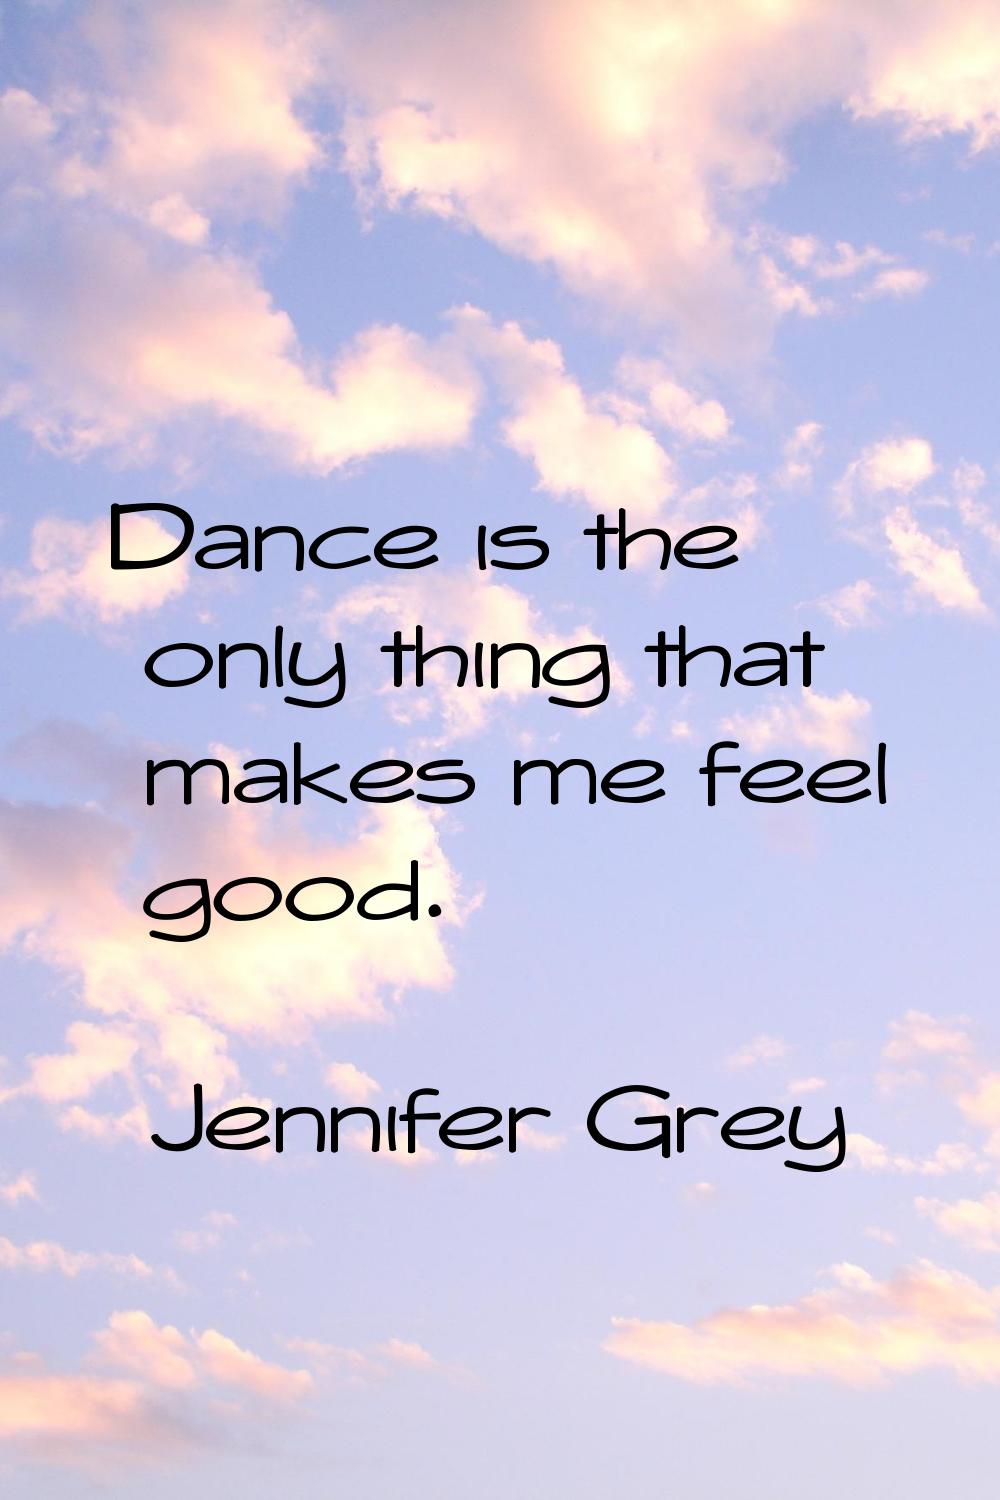 Dance is the only thing that makes me feel good.